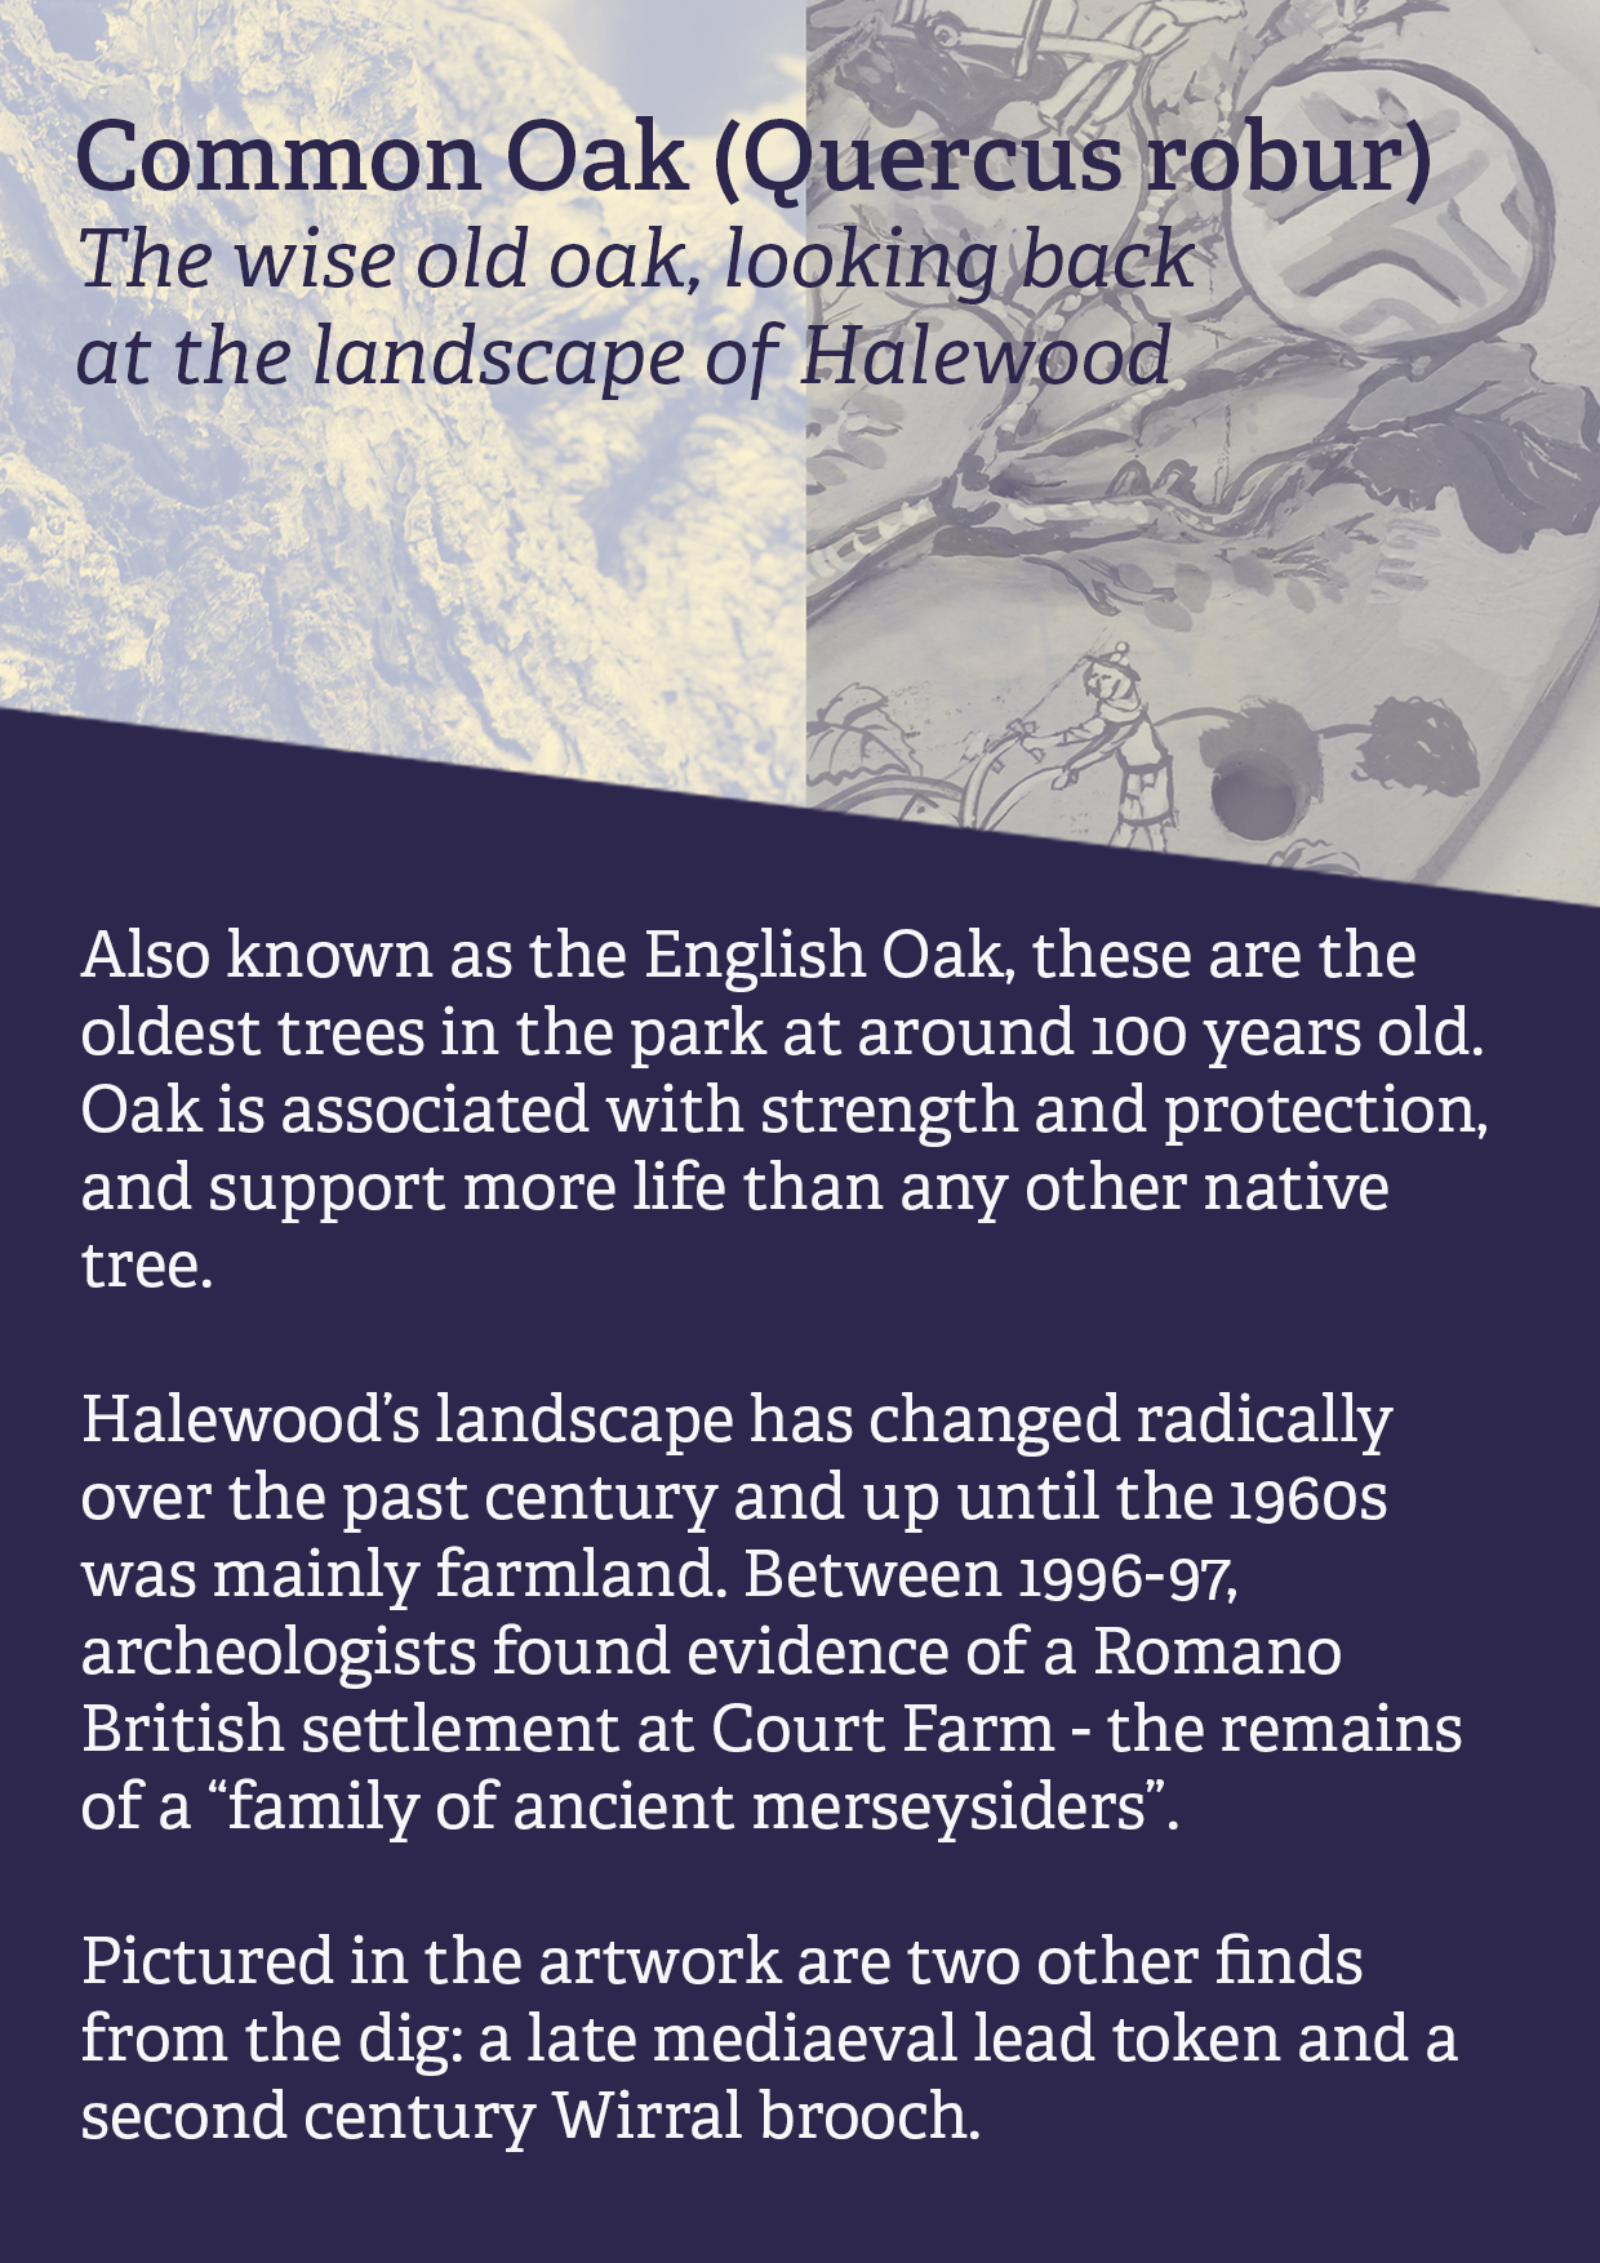 Information Card for the Common Oak Artwork.